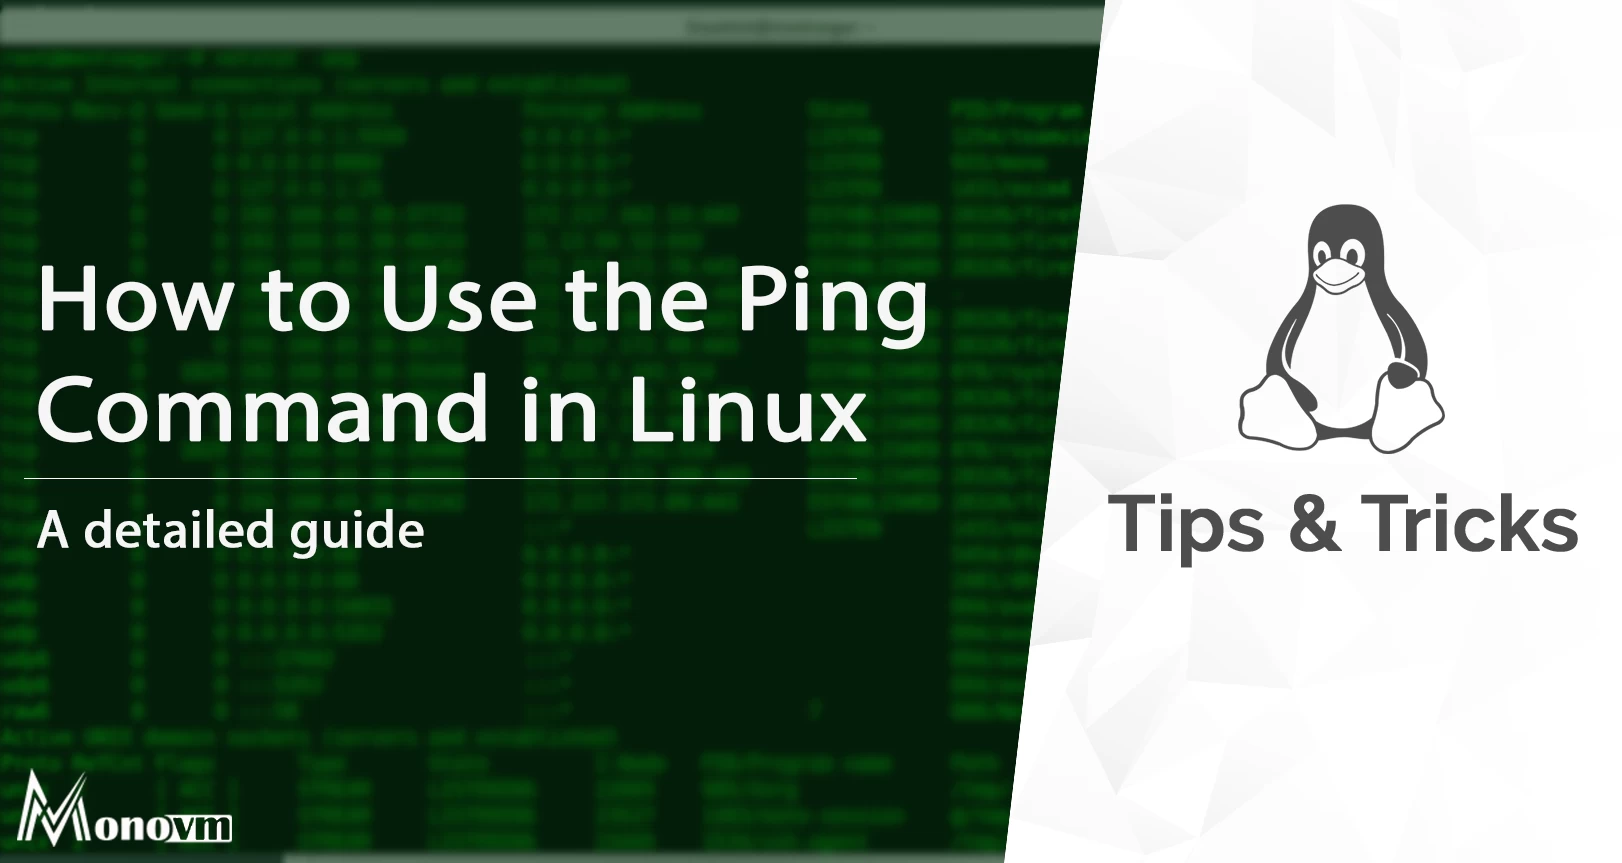 Why is the Ping Command Important?